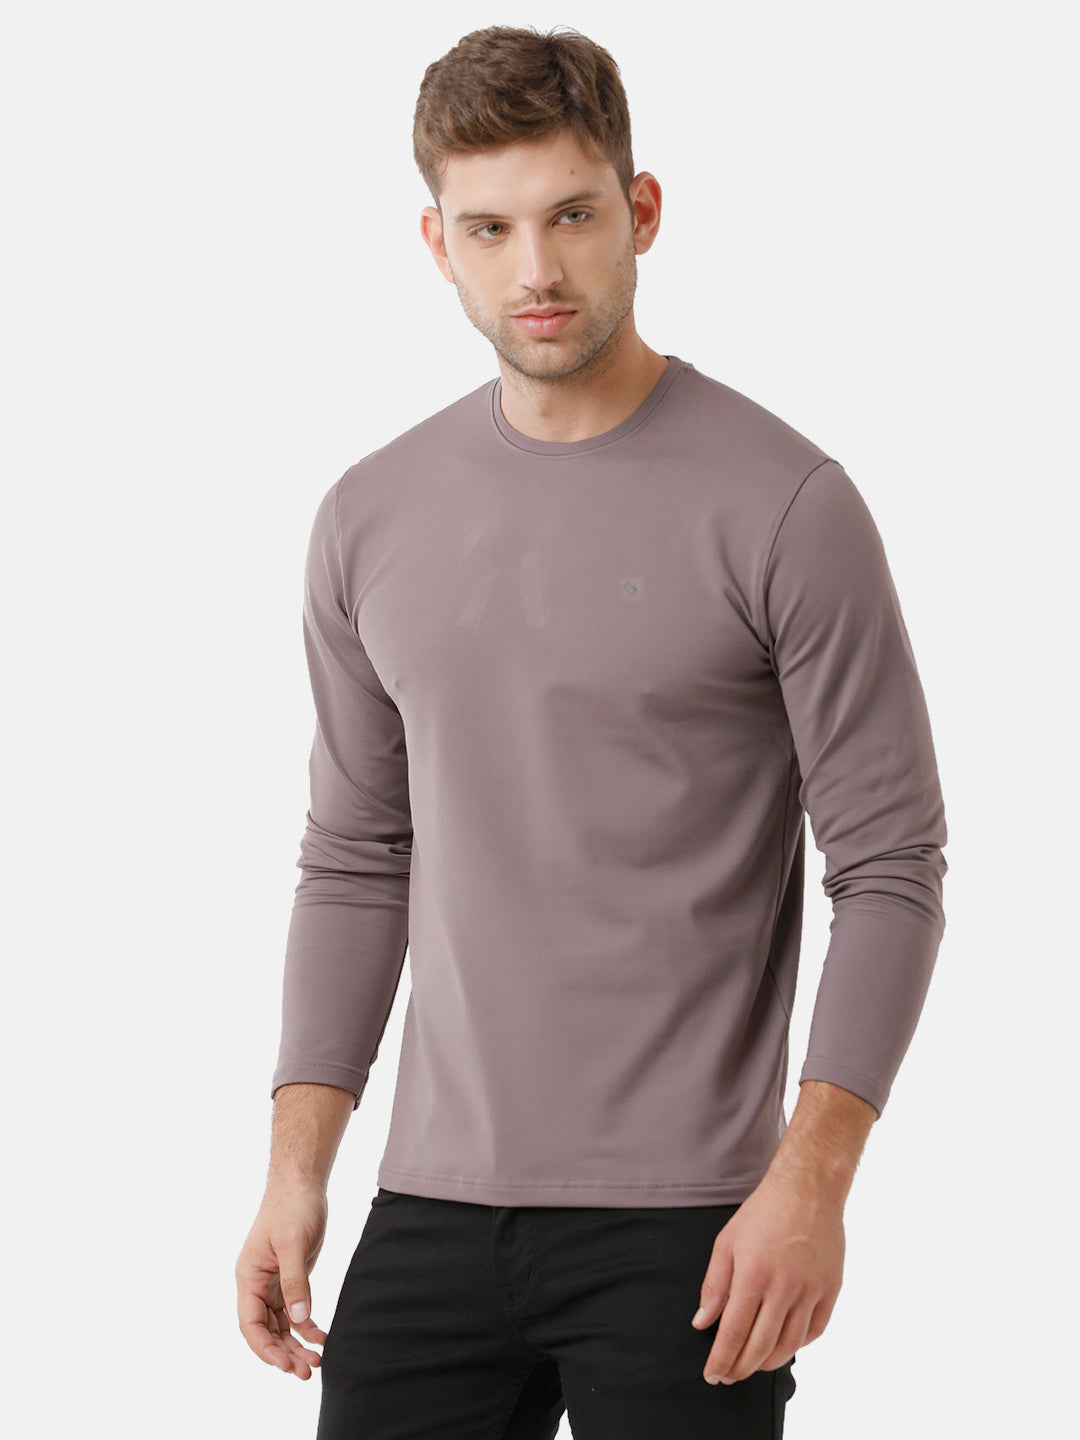 Classic Polo Mens Cotton Full Sleeve Solid Slim Fit Round Neck Light Brown Color T-Shirt | Verno 310 A